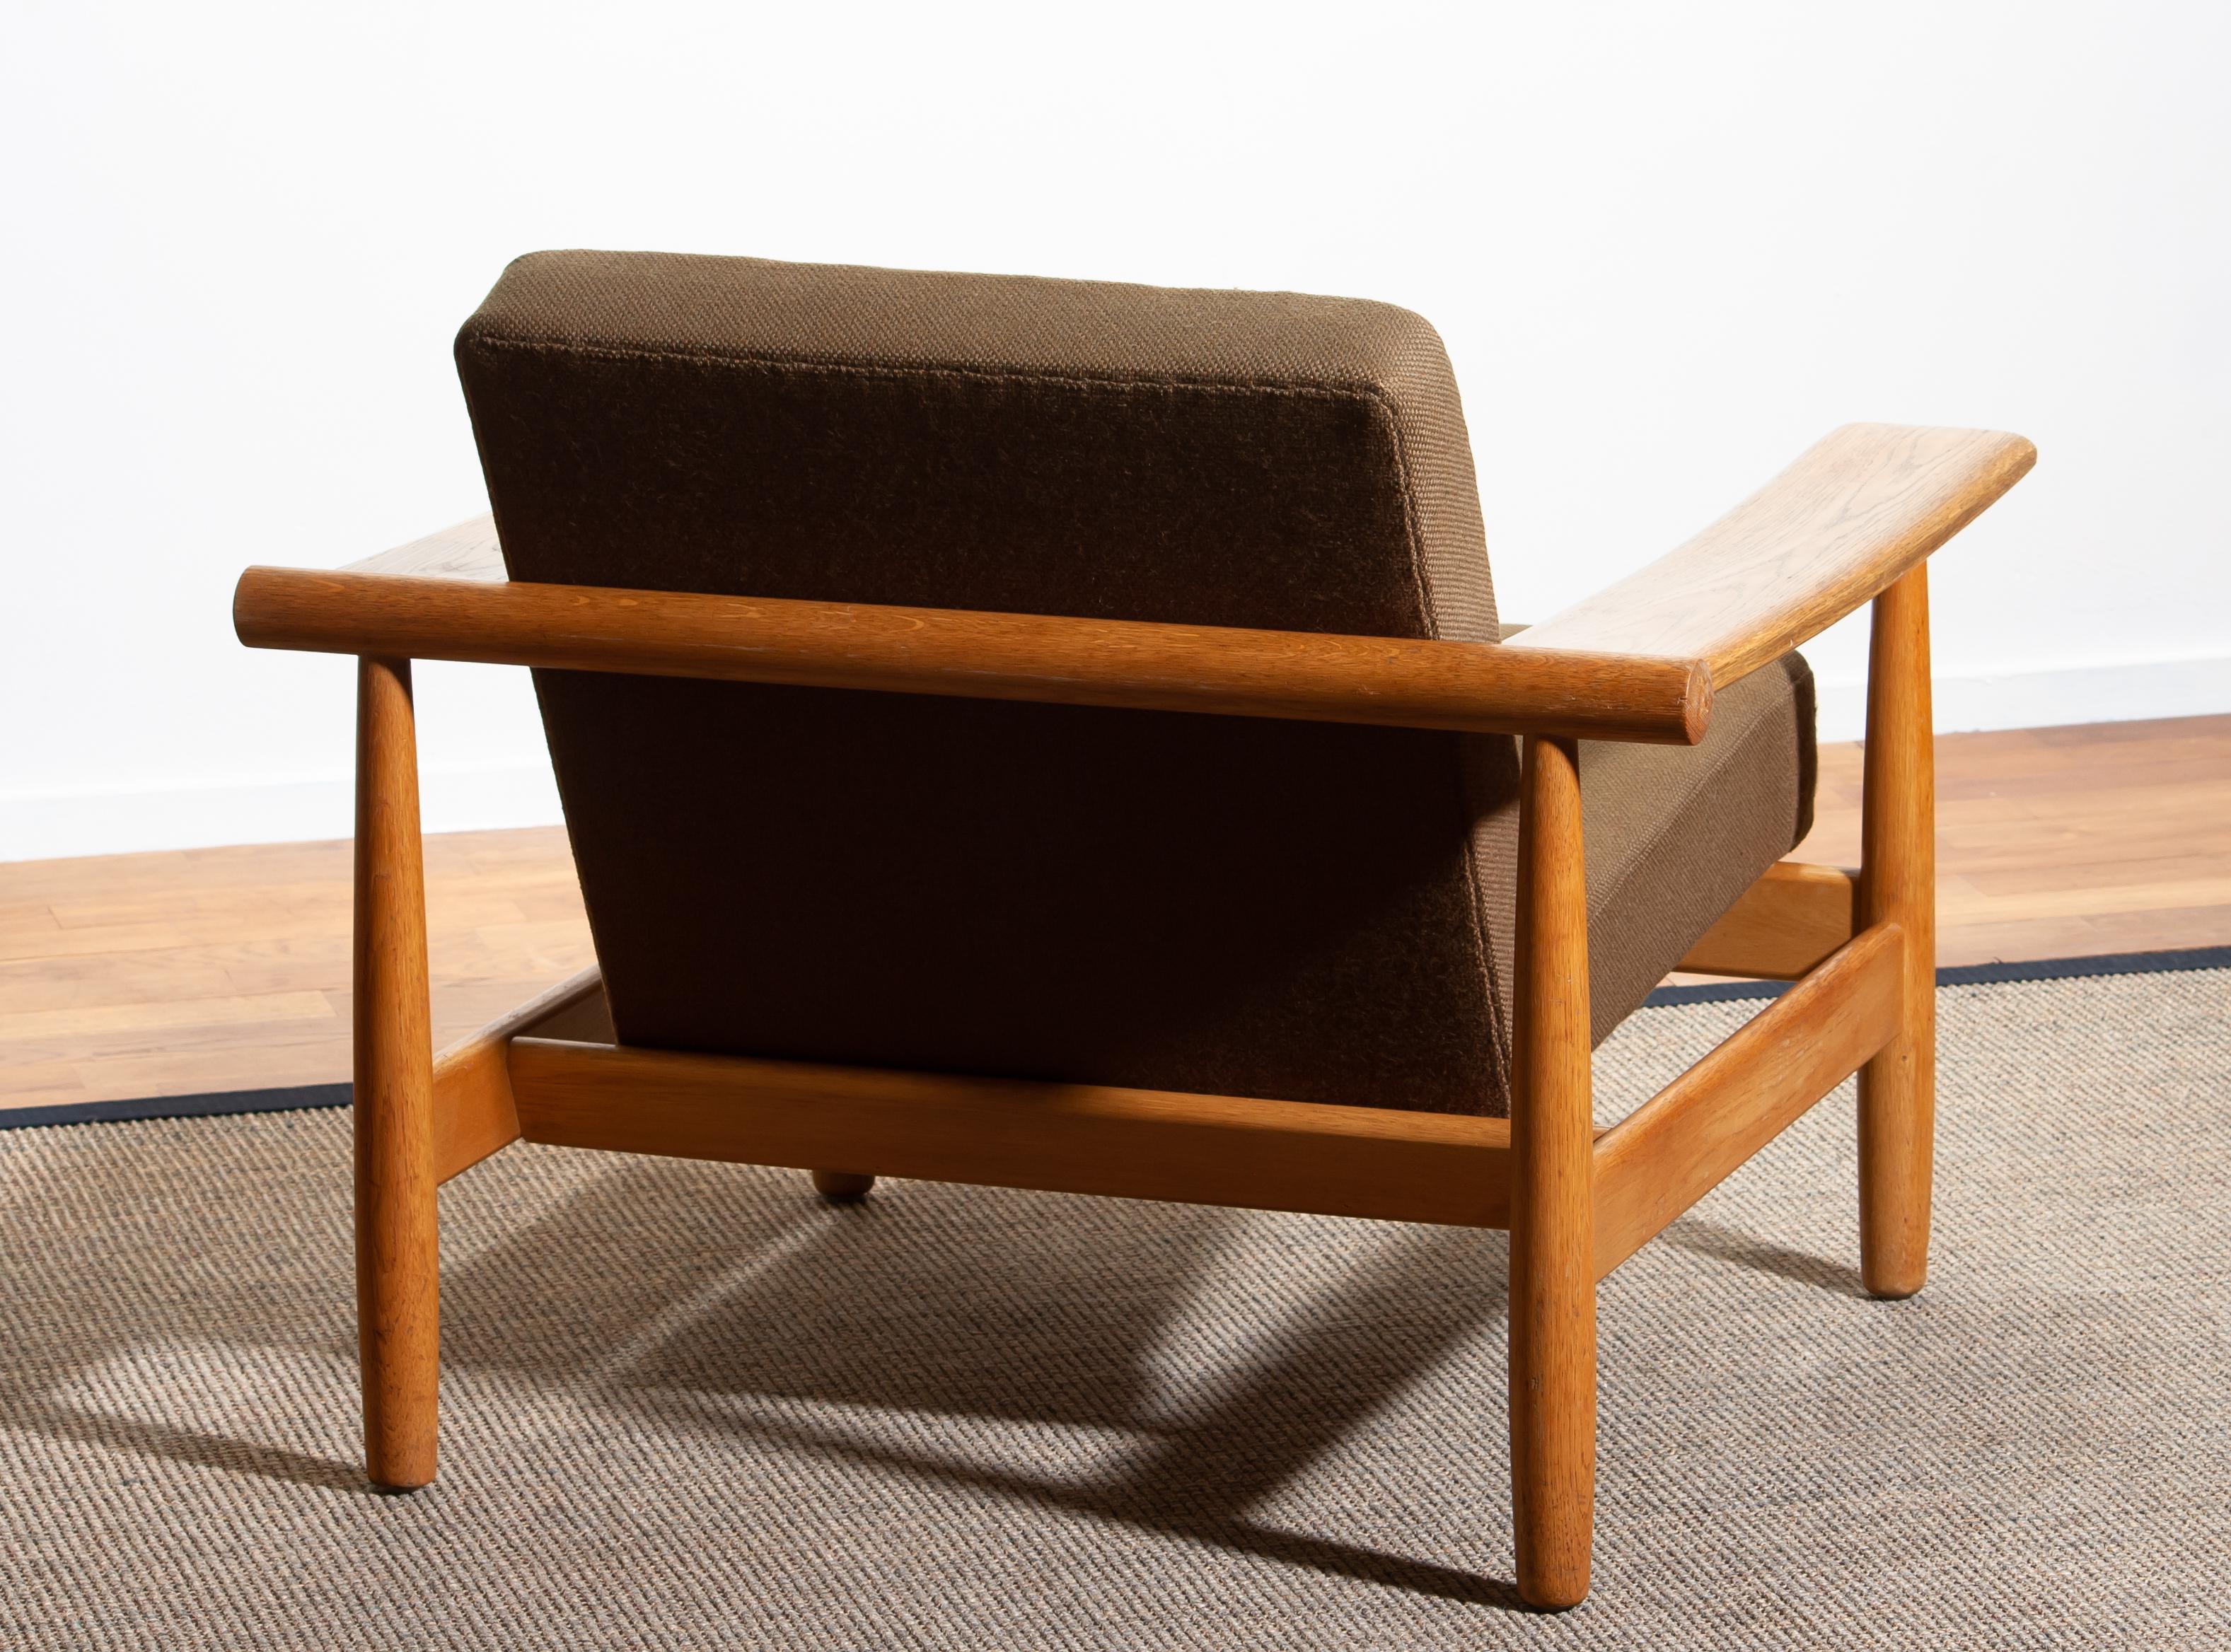 1960s, Oak Sofa and Lounge Chair or Living Room Set from Denmark 5